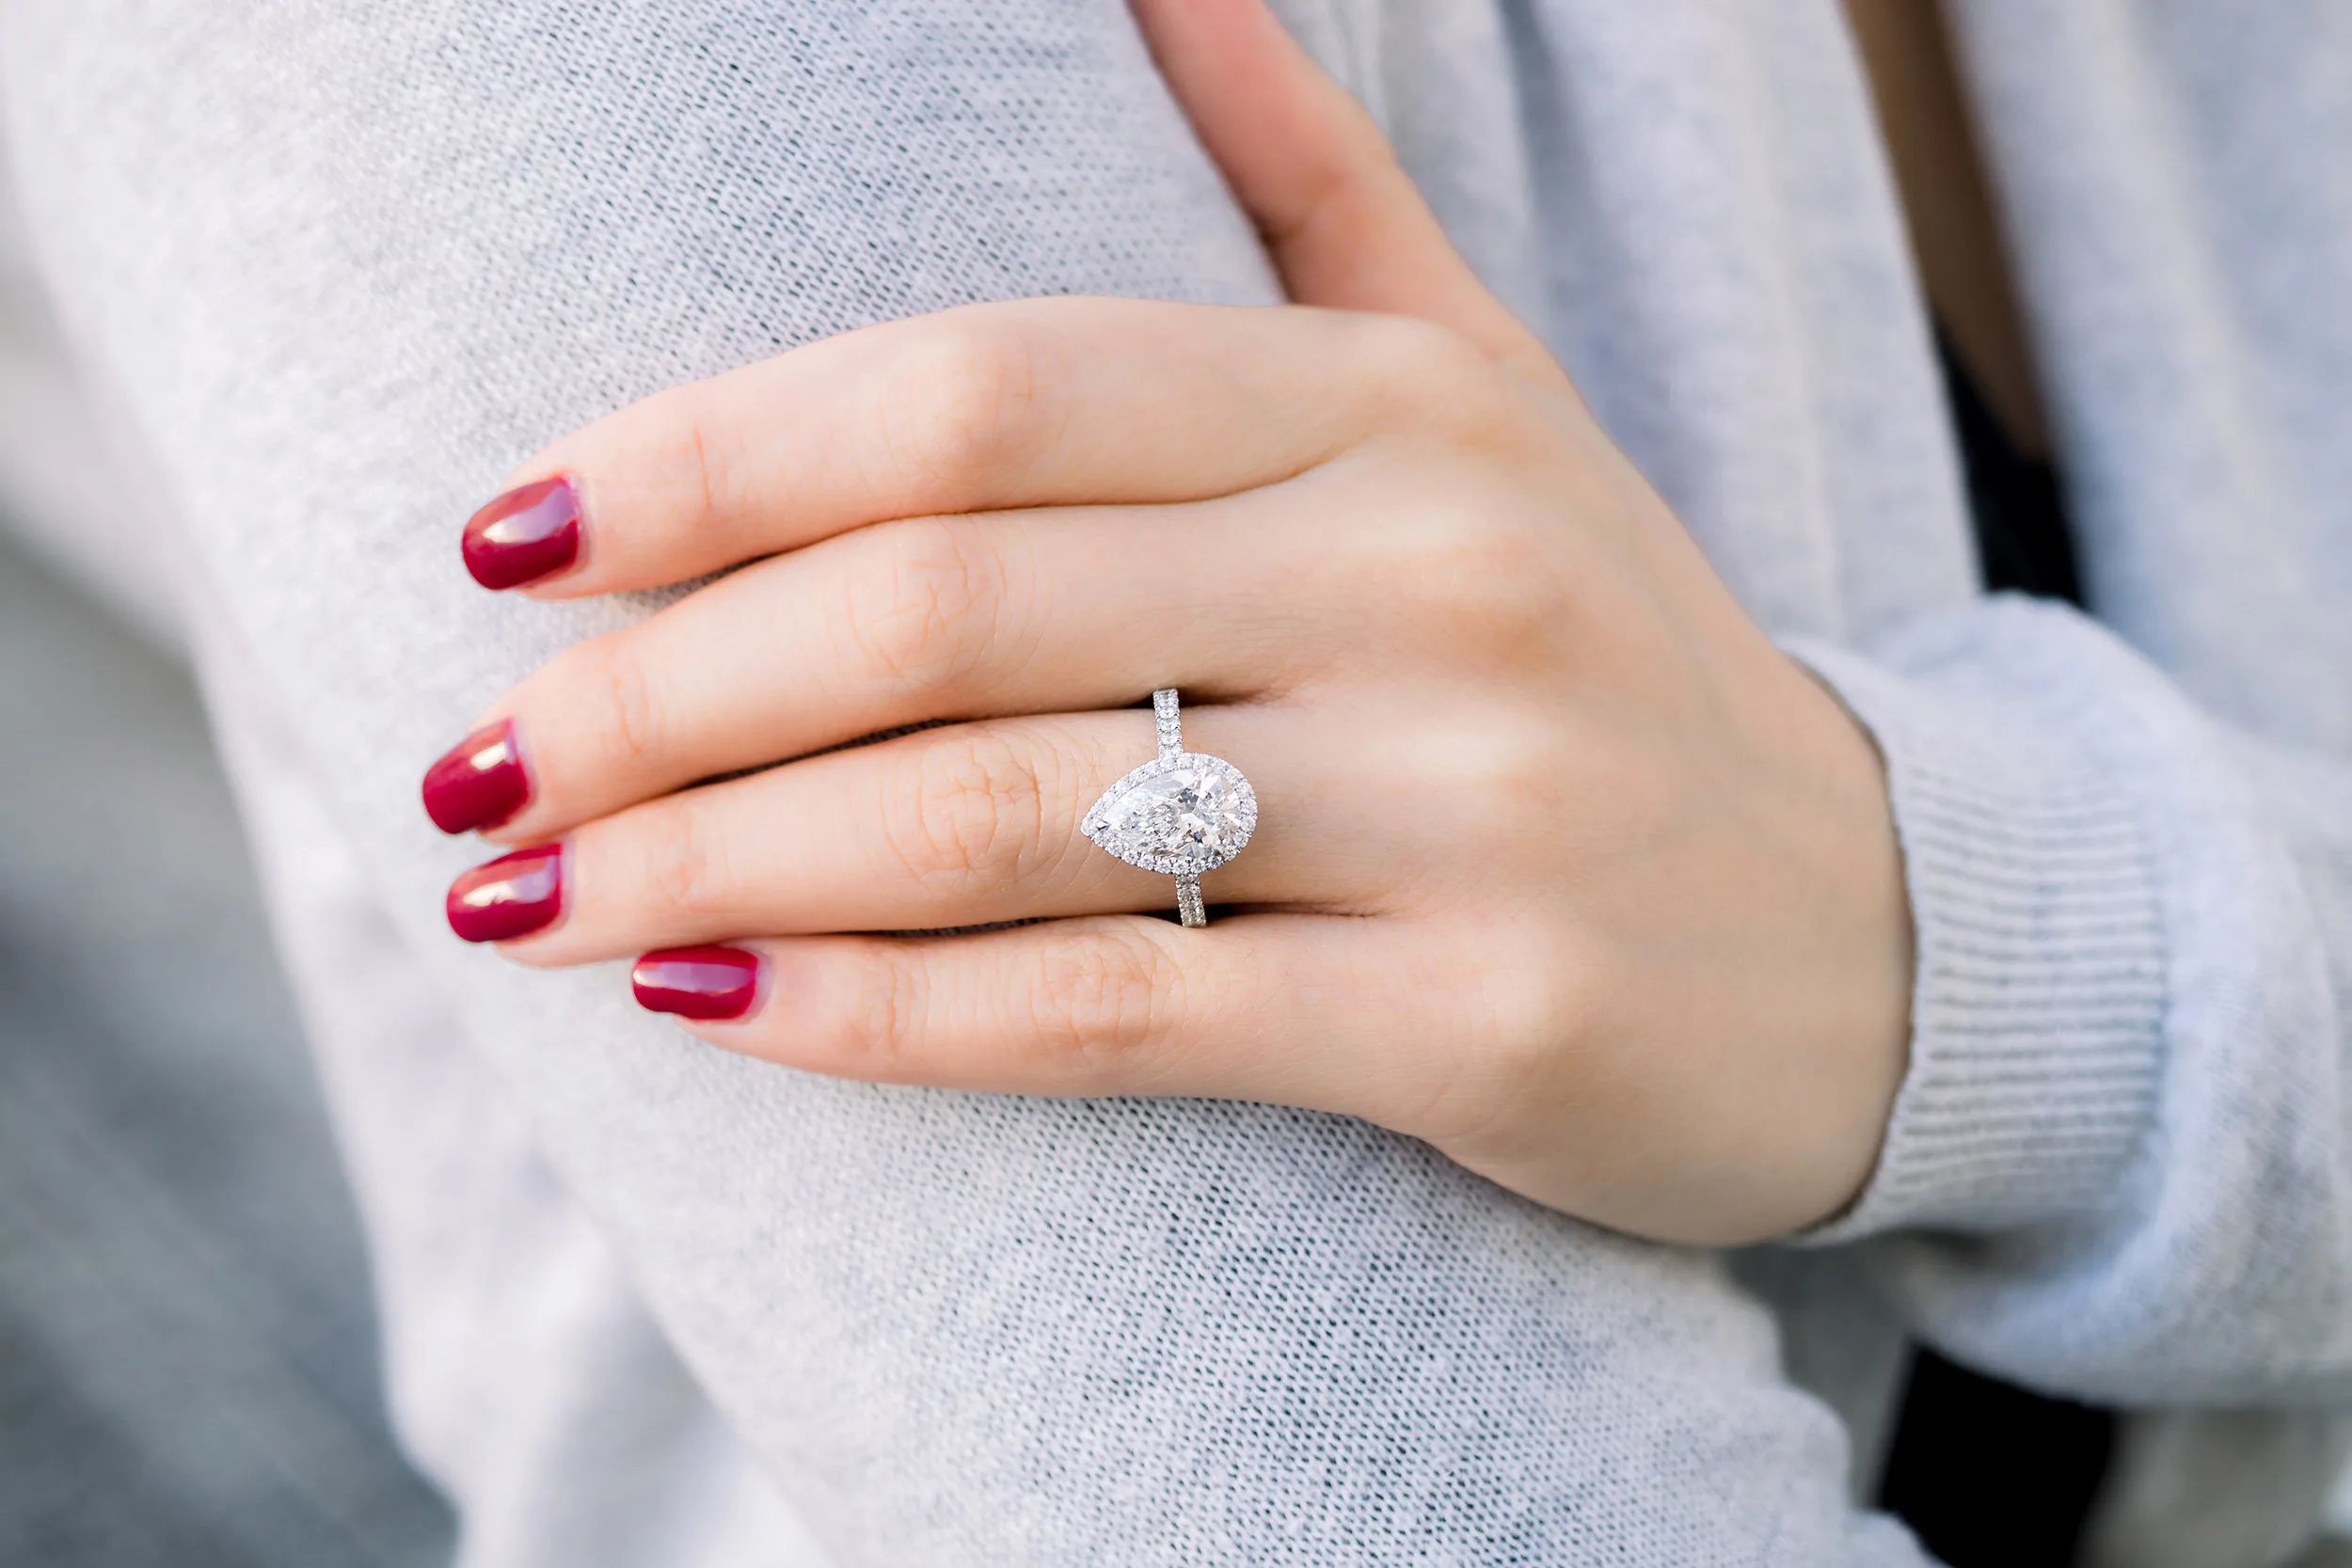 2 Carat Diamond Rings - How Much to Pay? Where & What to Buy? (and what  NOT!) | Naturally Colored